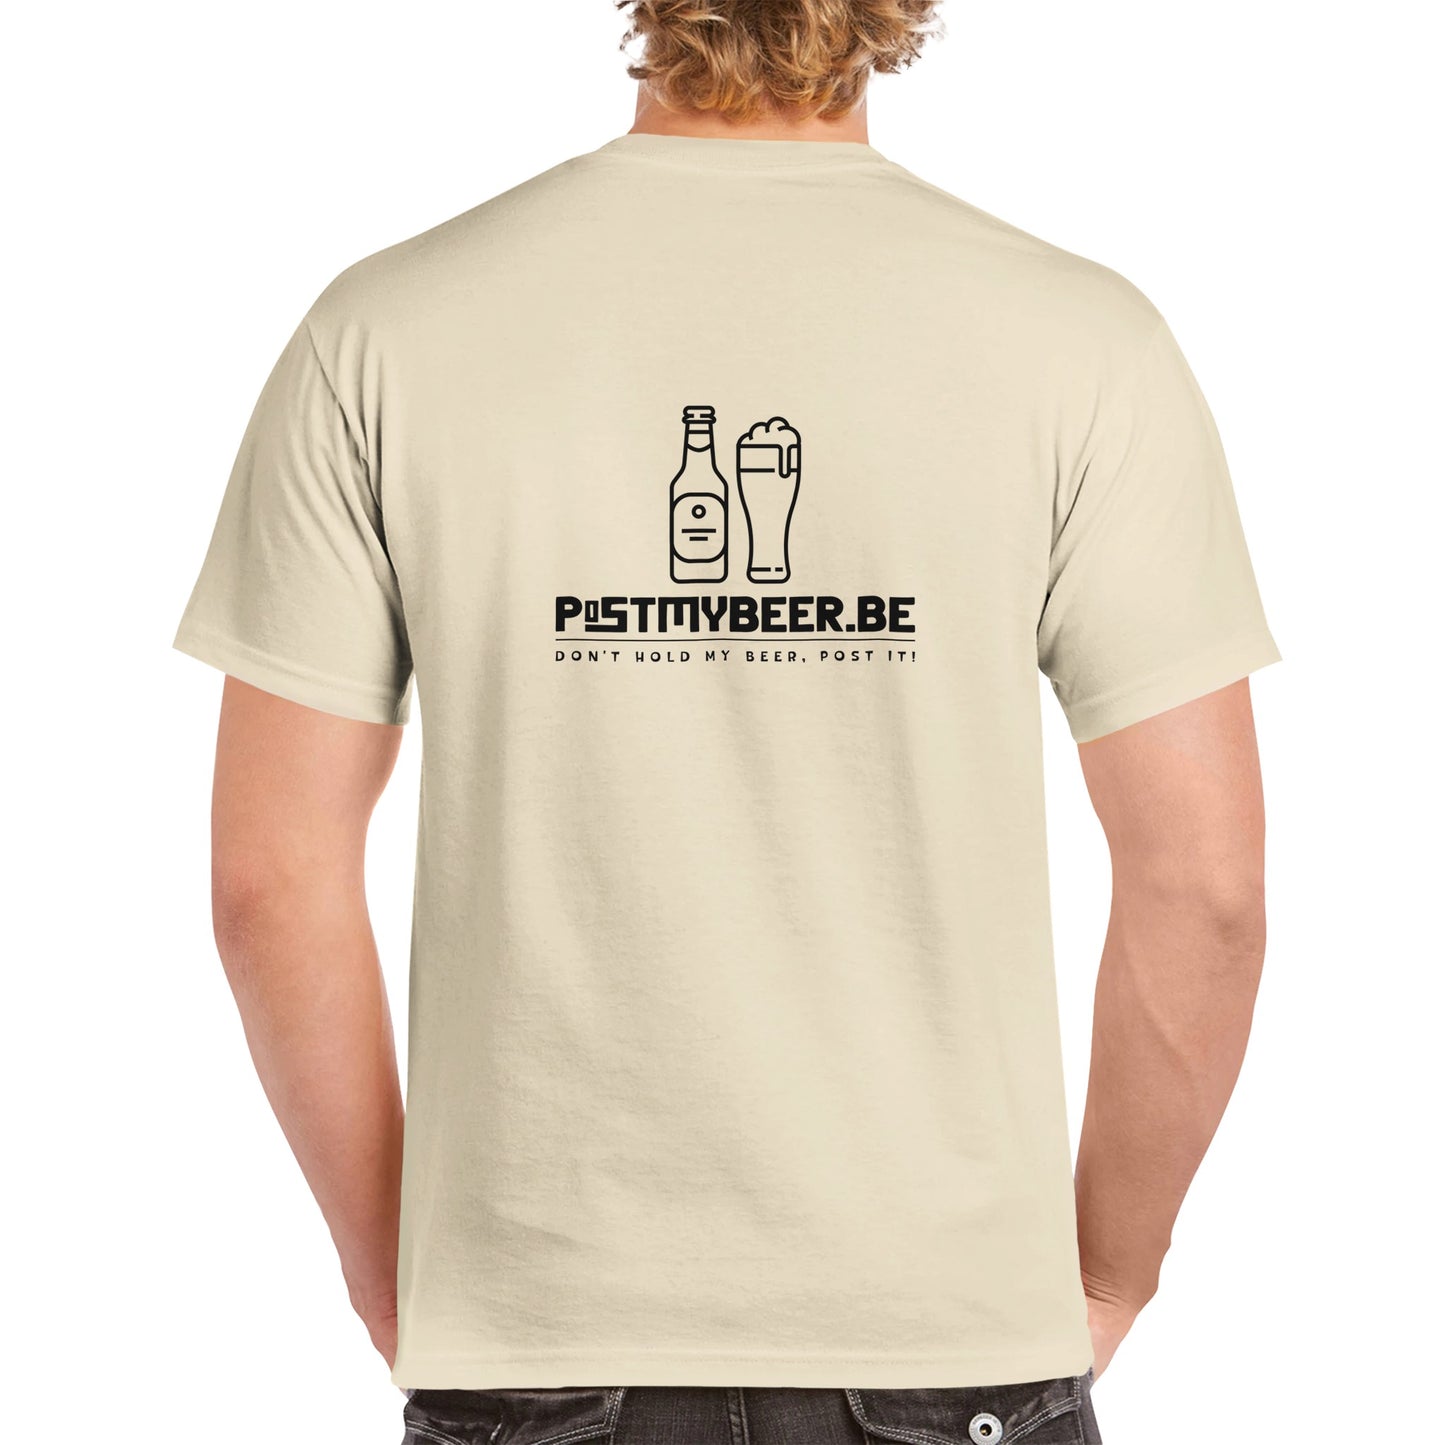 Official postmybeer T-shirt